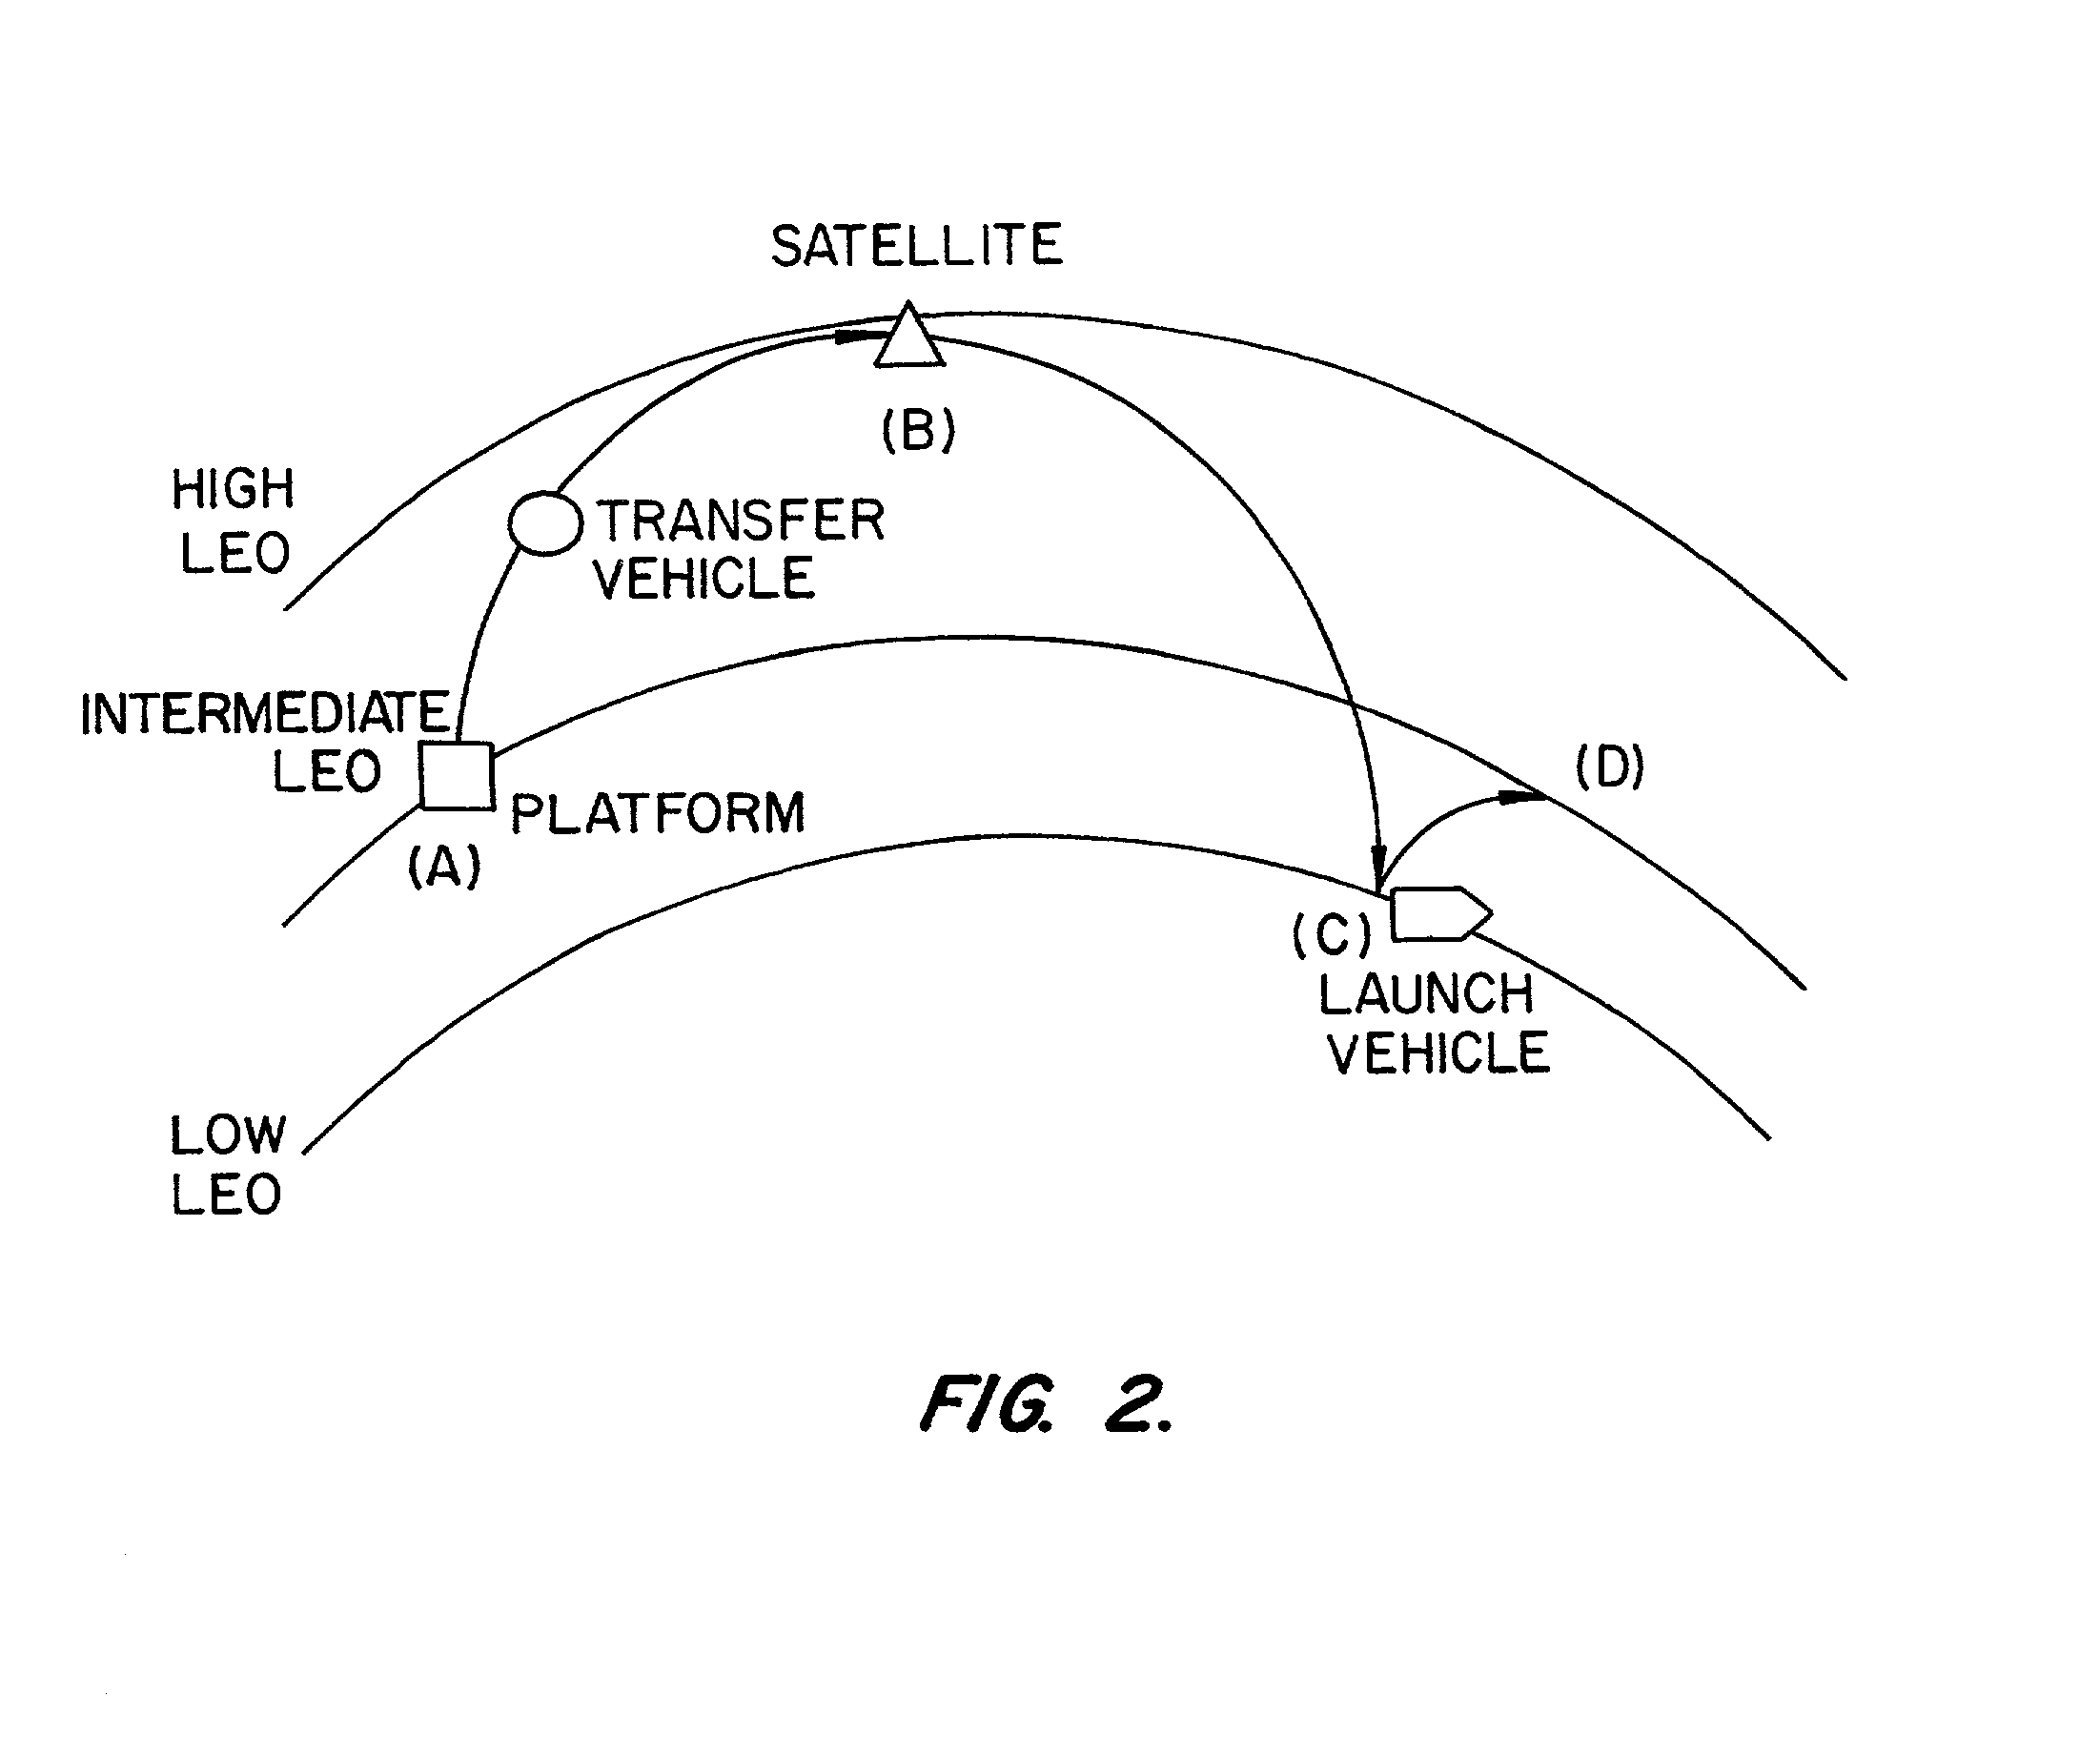 Method of using dwell times in intermediate orbits to optimize orbital transfers and method and apparatus for satellite repair